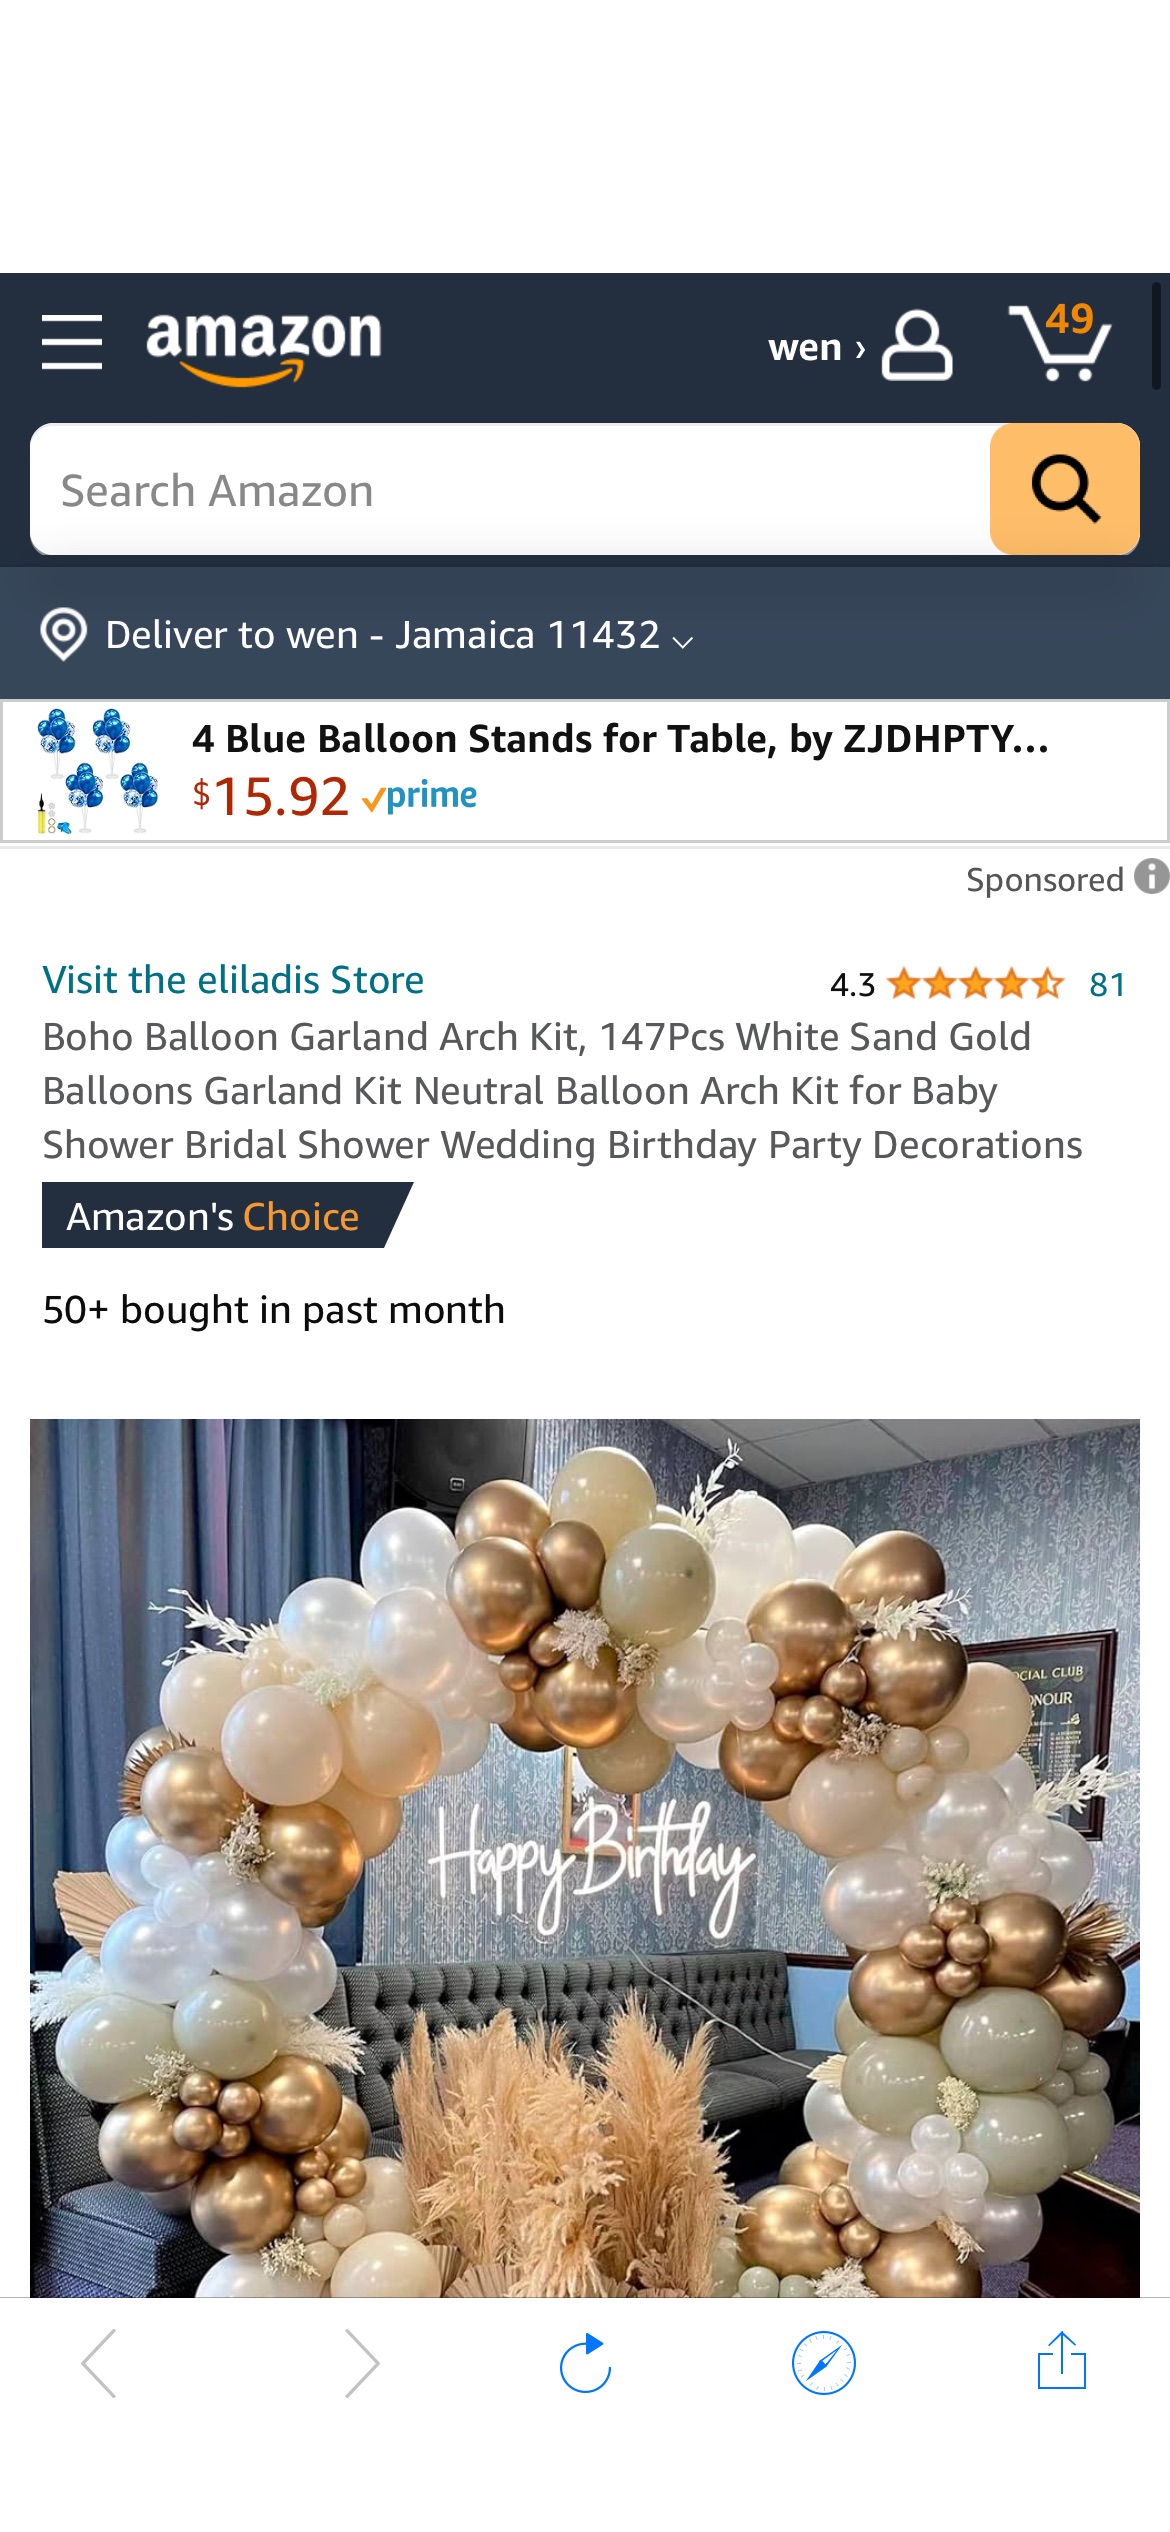 Amazon.com: Boho Balloon Garland Arch Kit, 147Pcs White Sand Gold Balloons Garland Kit Neutral Balloon Arch Kit for Baby Shower Bridal Shower Wedding Birthday Party Decorations : Home & Kitchen